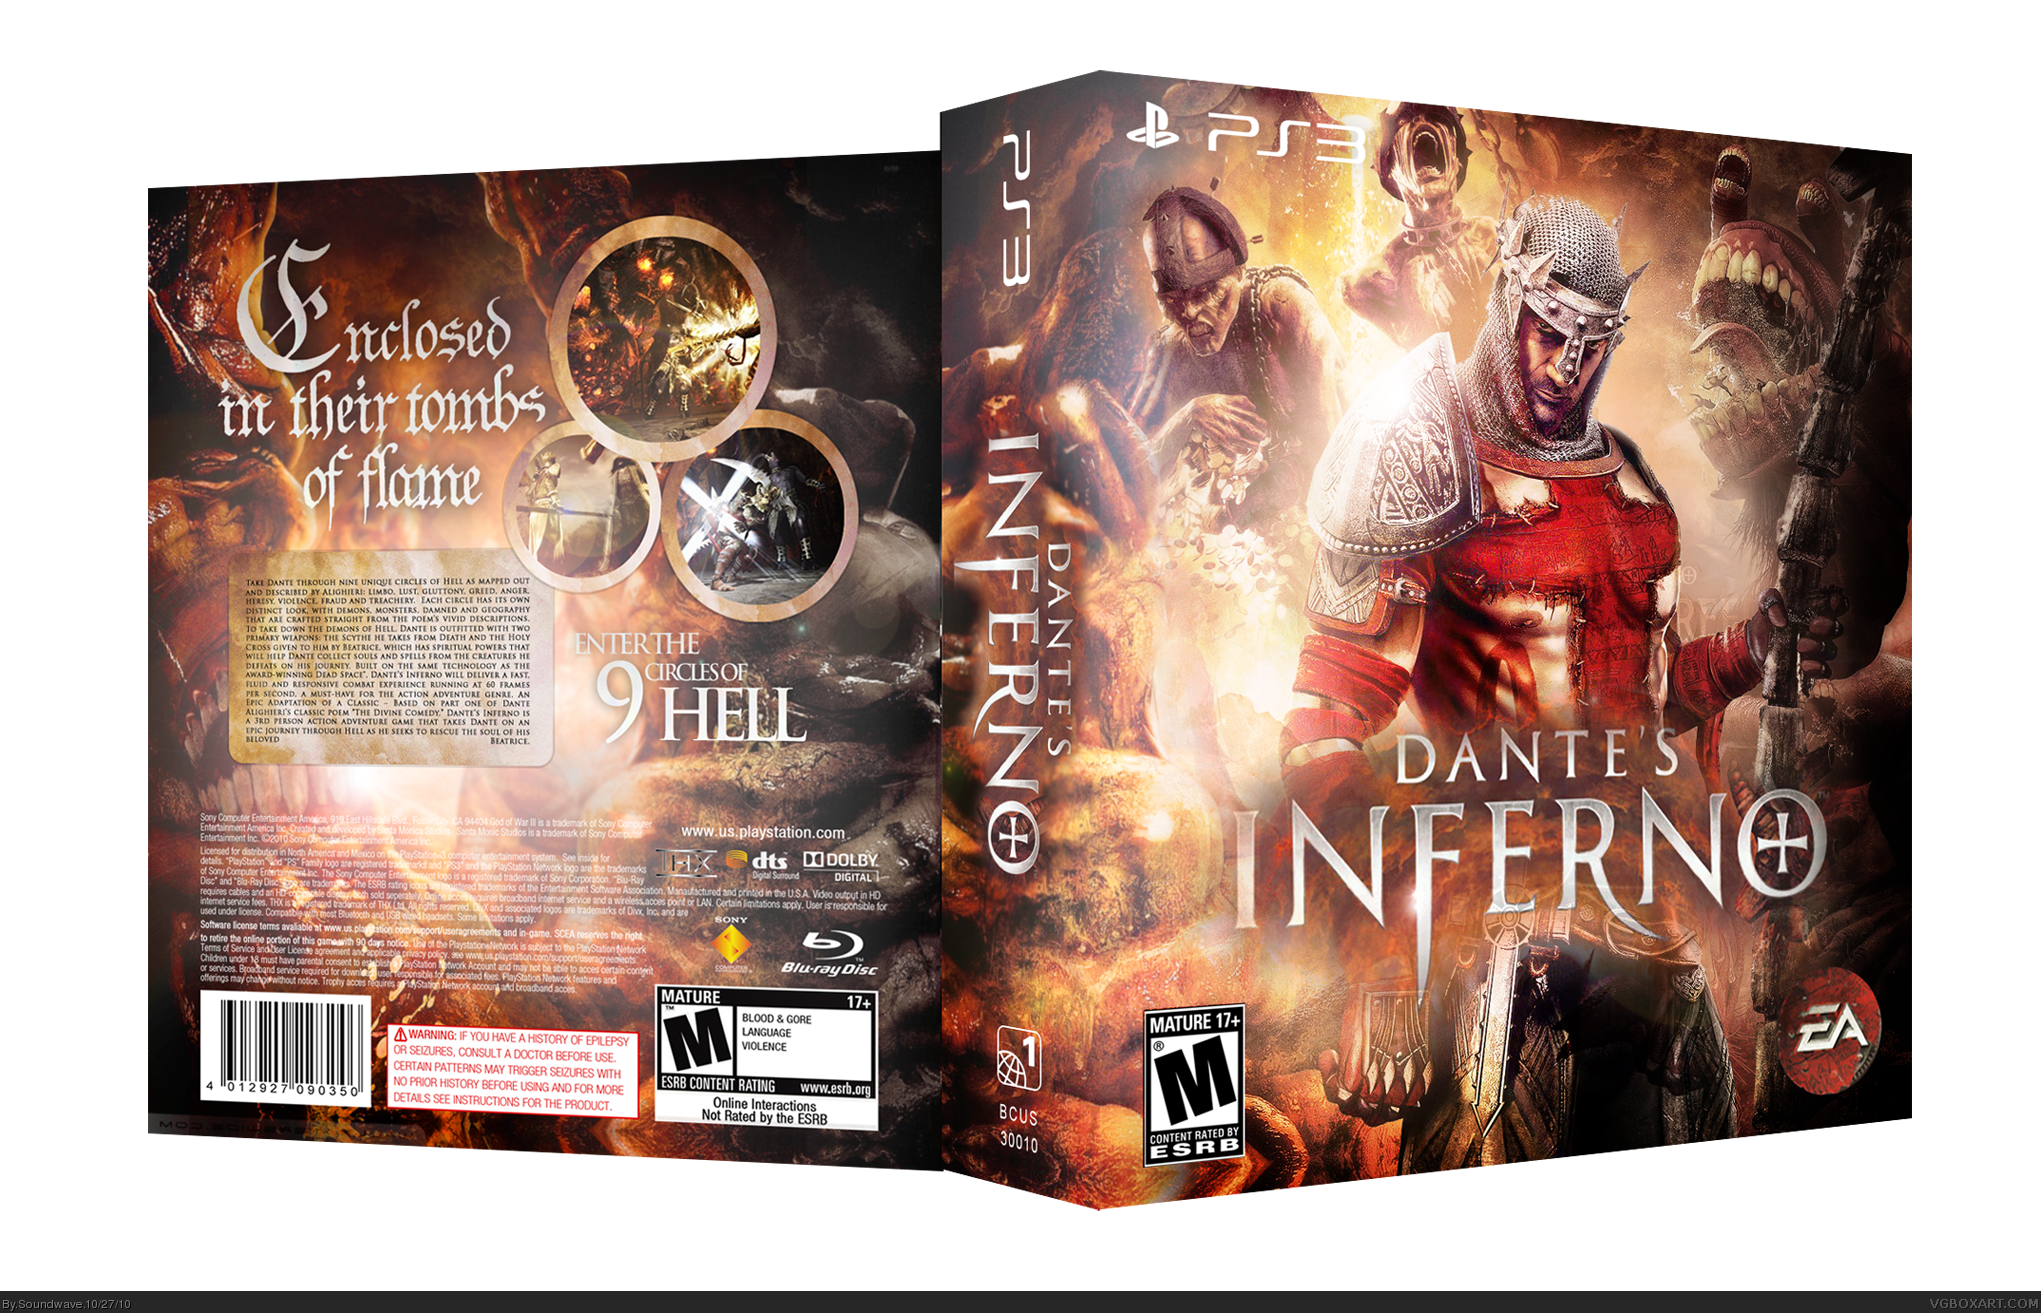 Dante's Inferno PlayStation 3 Box Art Cover by Joeseye